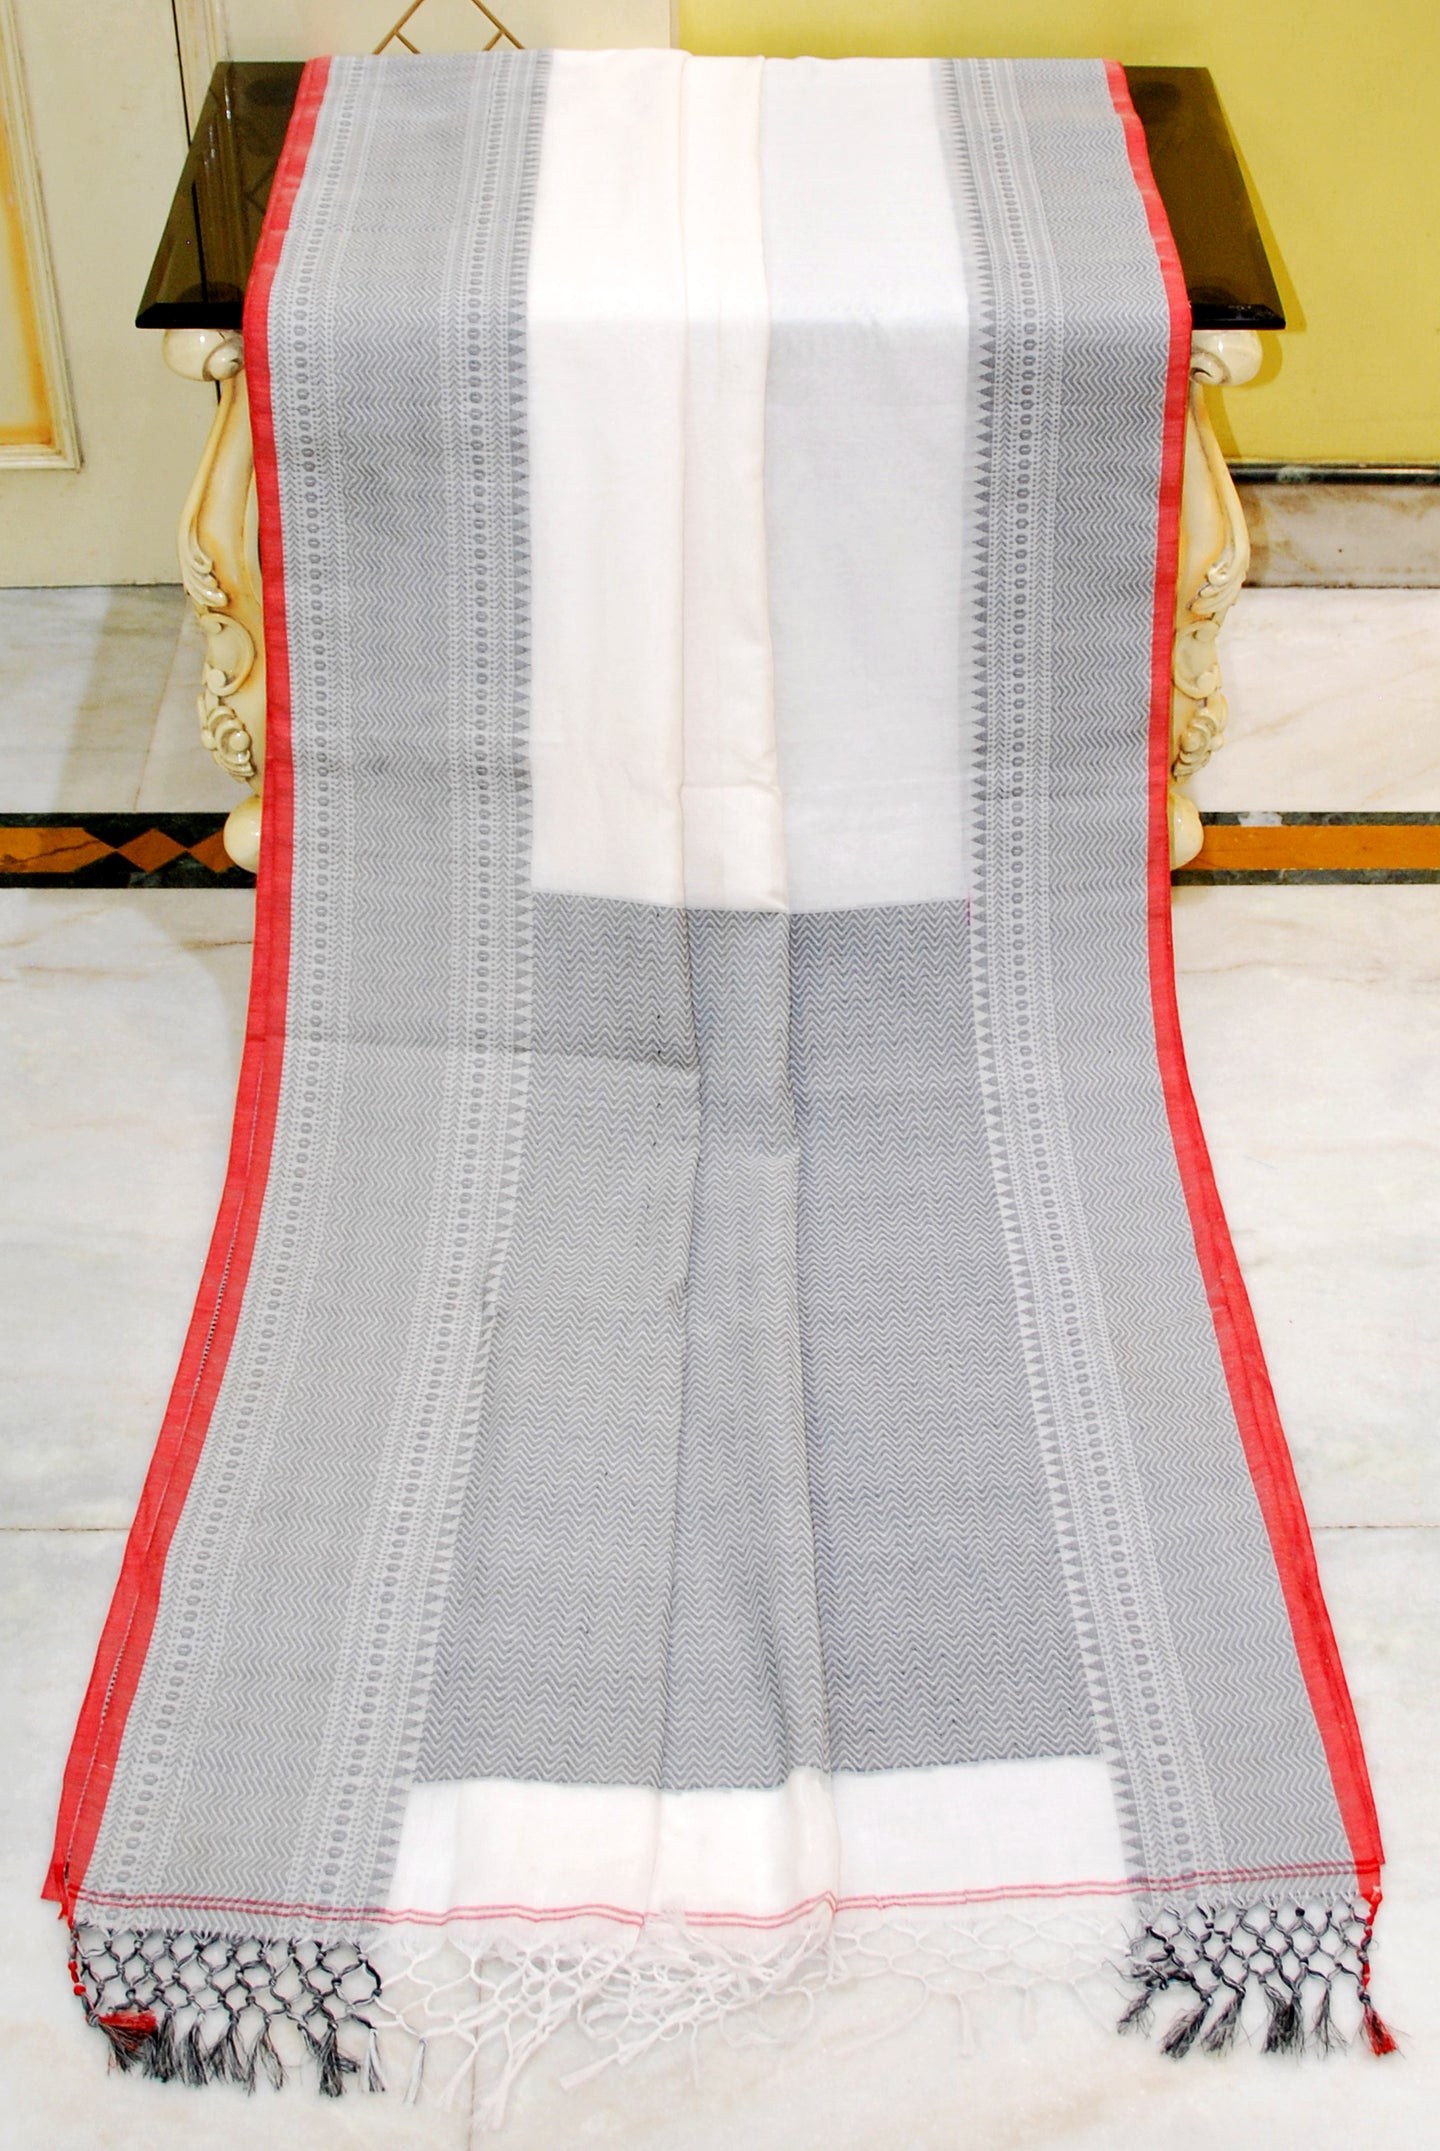 Soft Cotton Handwoven Khaddar Saree in Off White, Black and Red